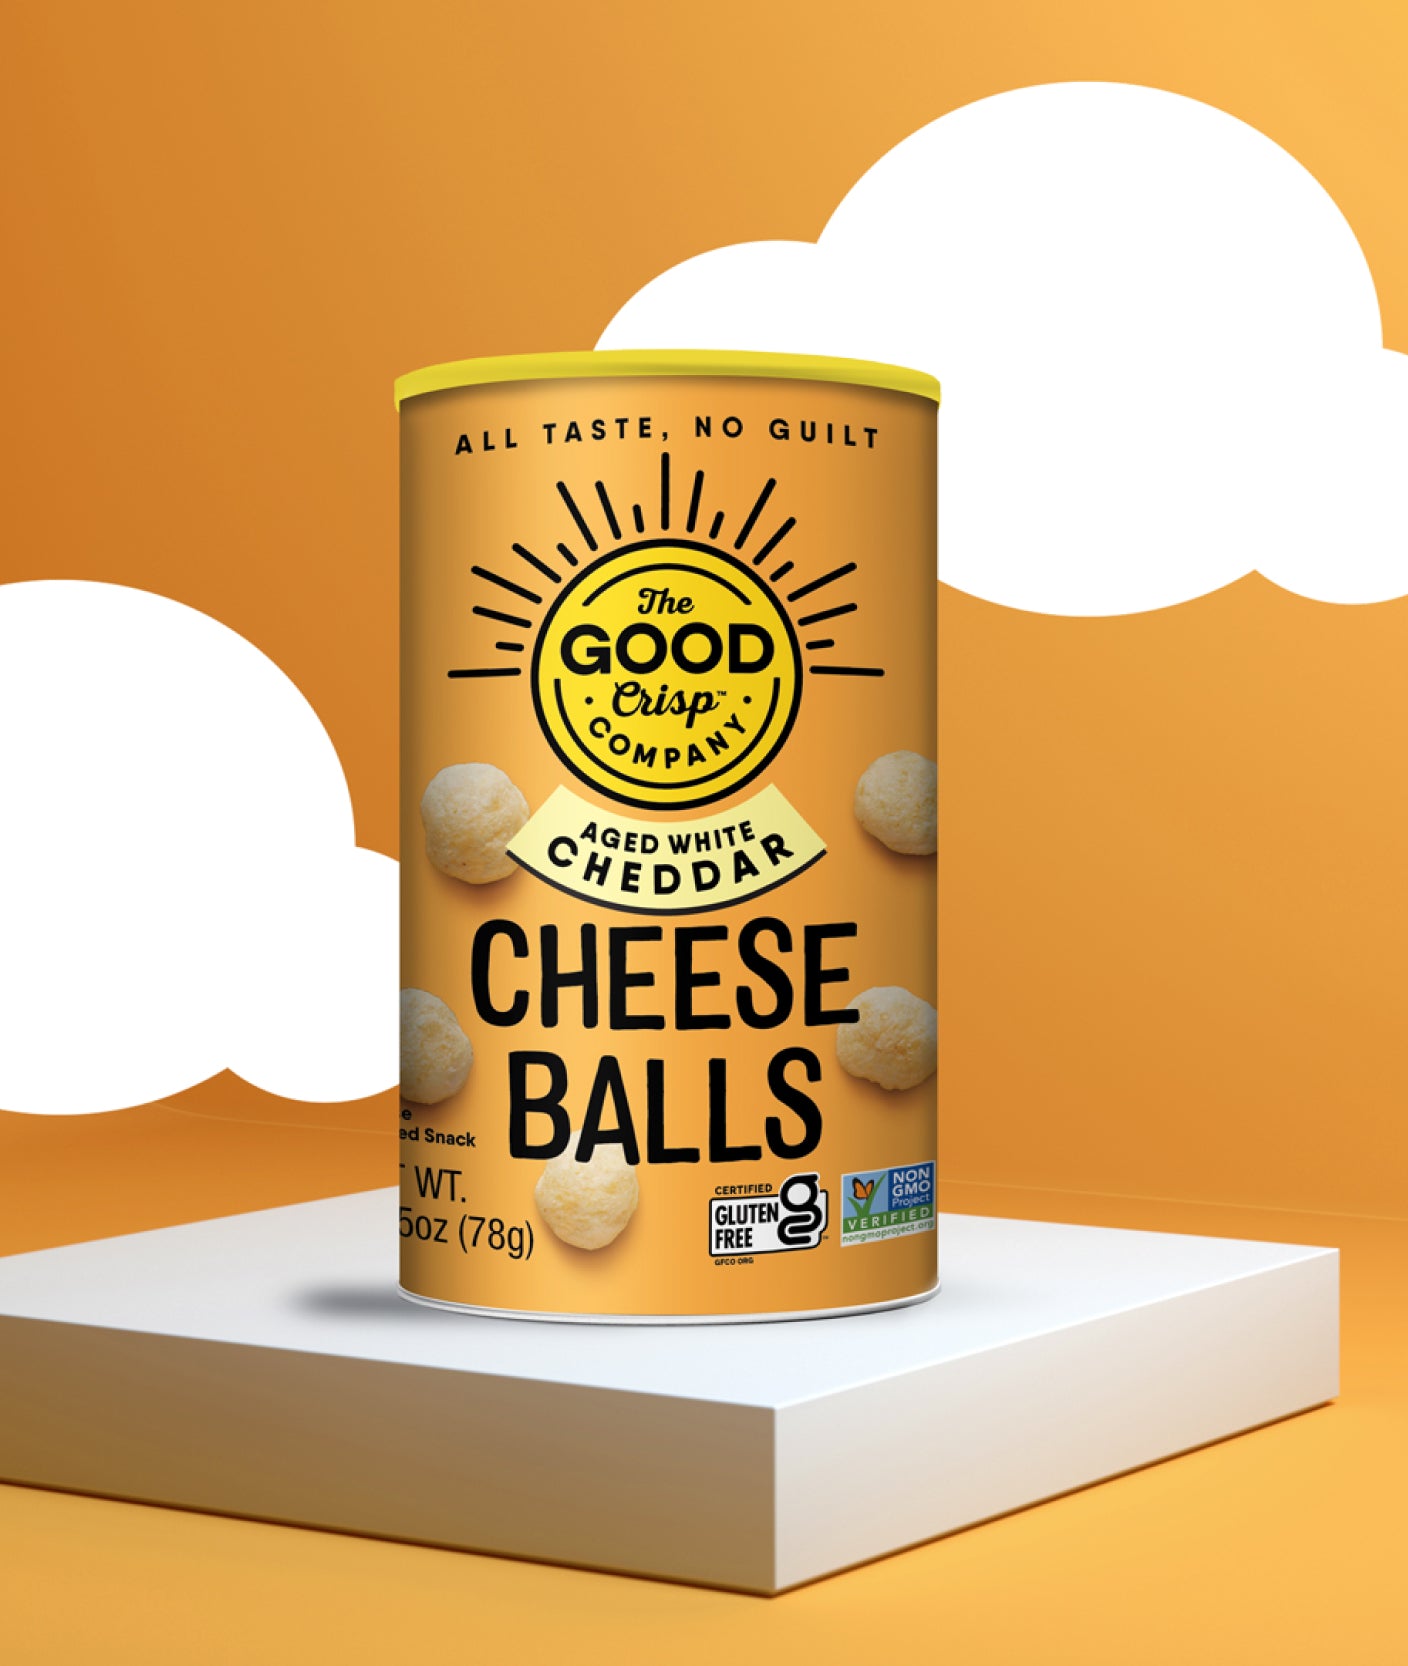 Aged White Cheddar Cheese Balls cannister presented with illustrated clouds